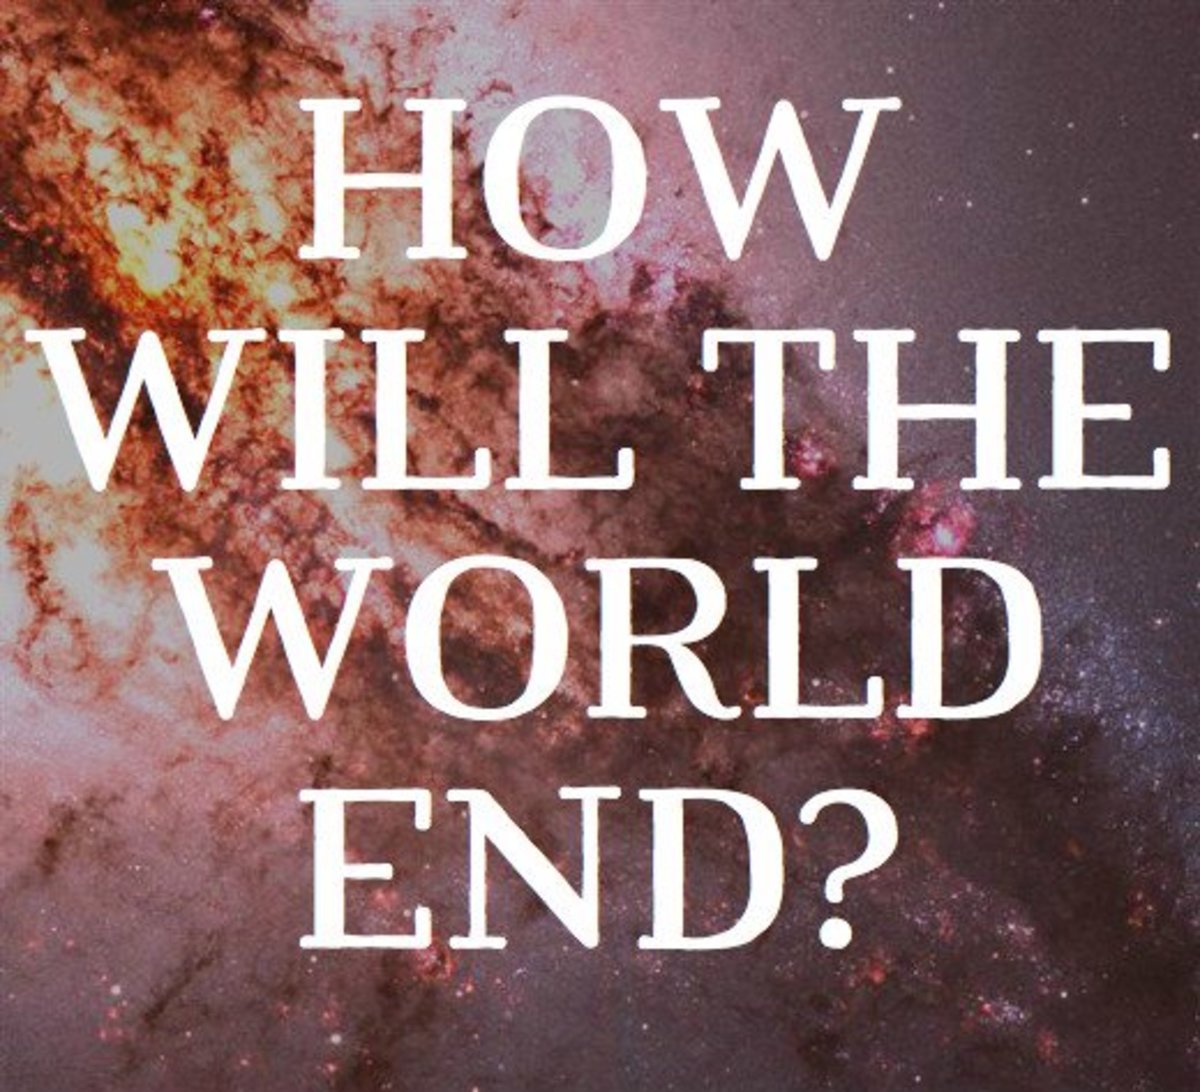 The End of the World (According to Nostradamus)